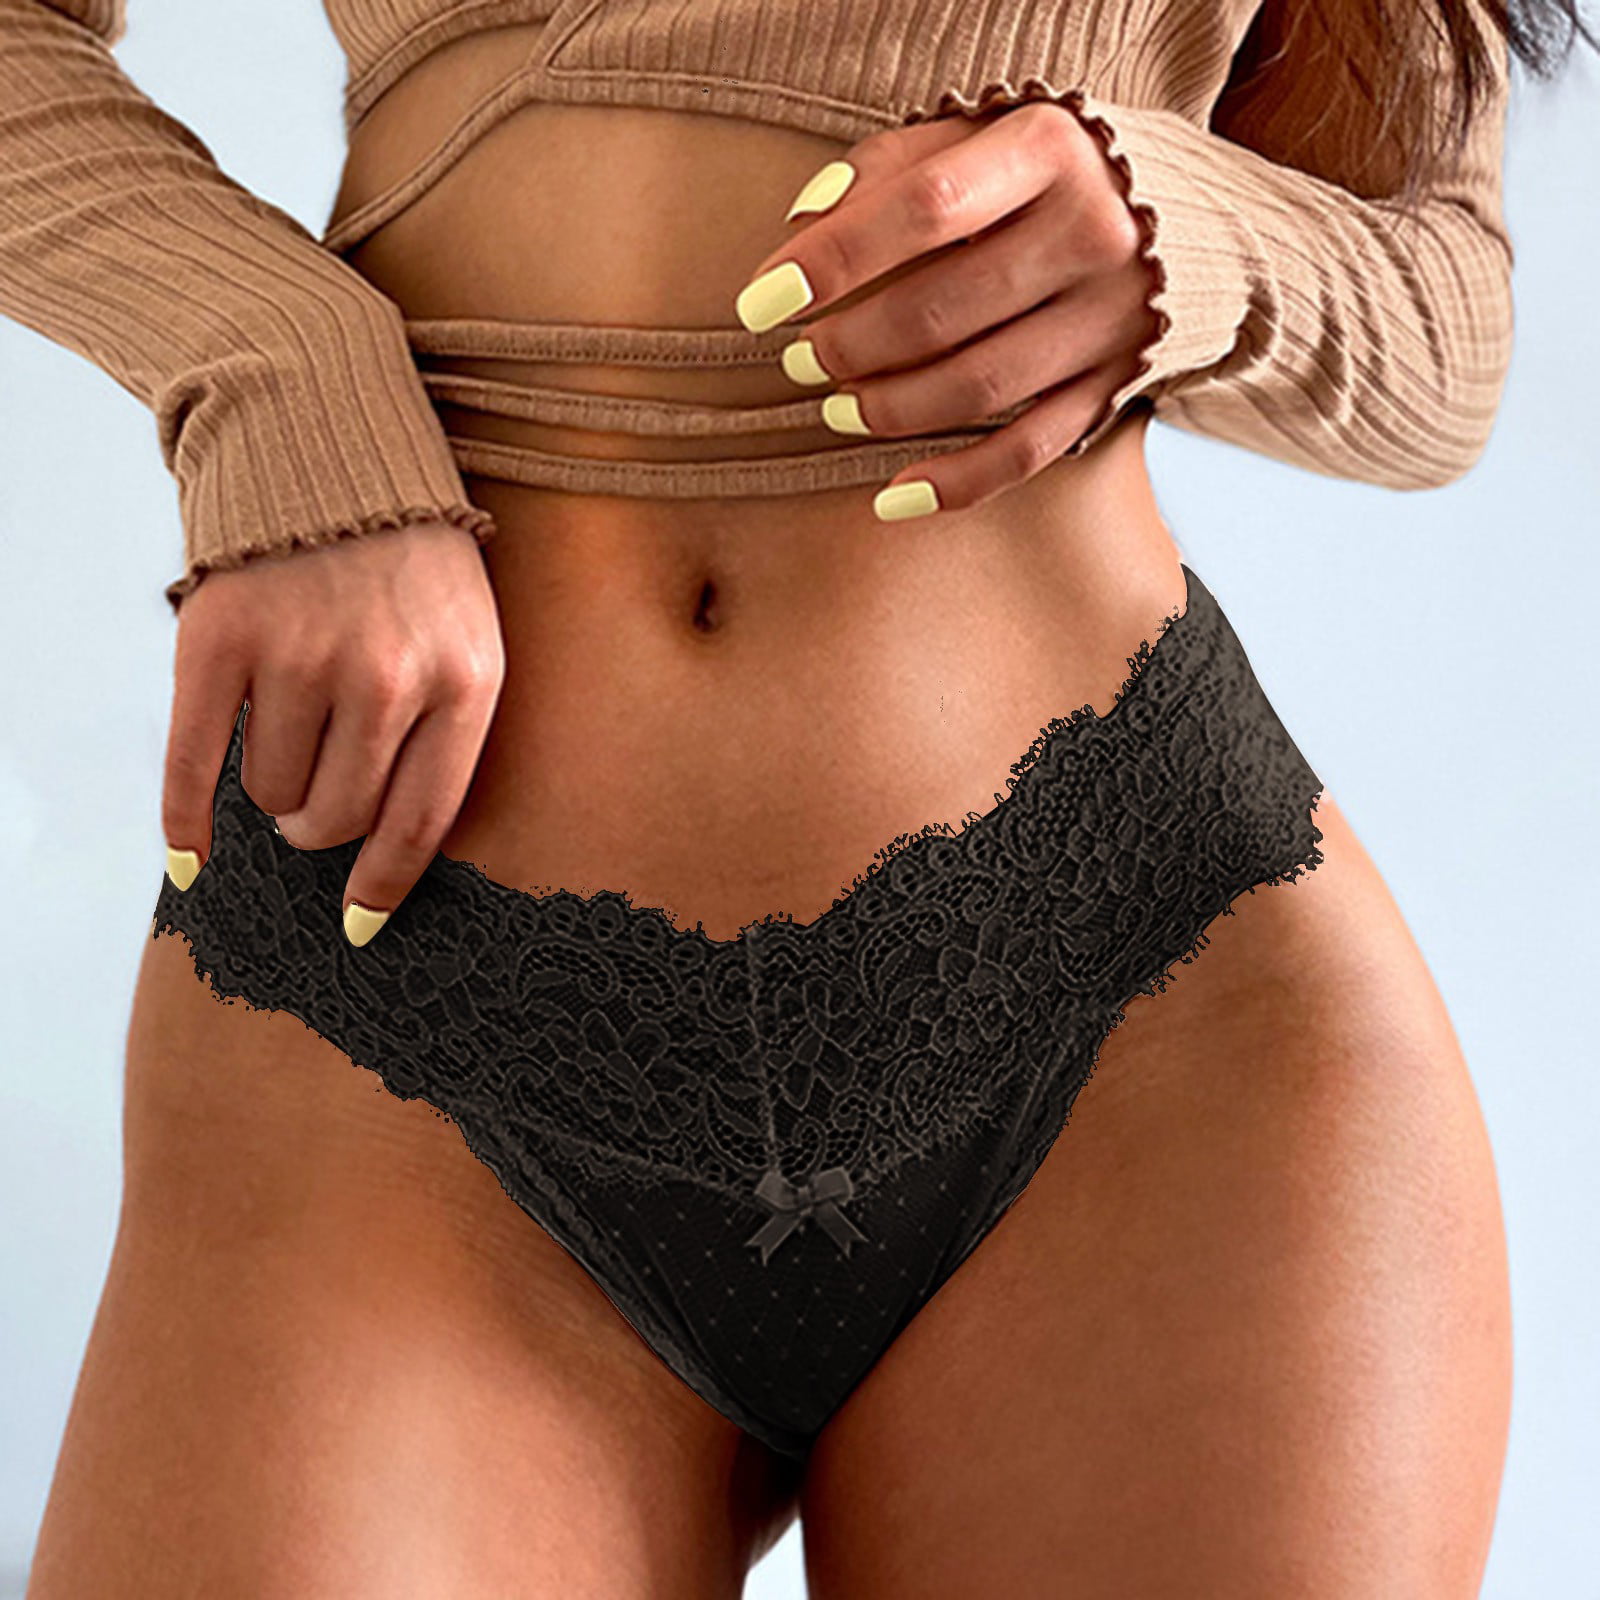 Zuwimk G String Thongs For Women,Womens Black Lace Thong Panties 6-Pack  Cute Lingerie Underwear Black,One Size 